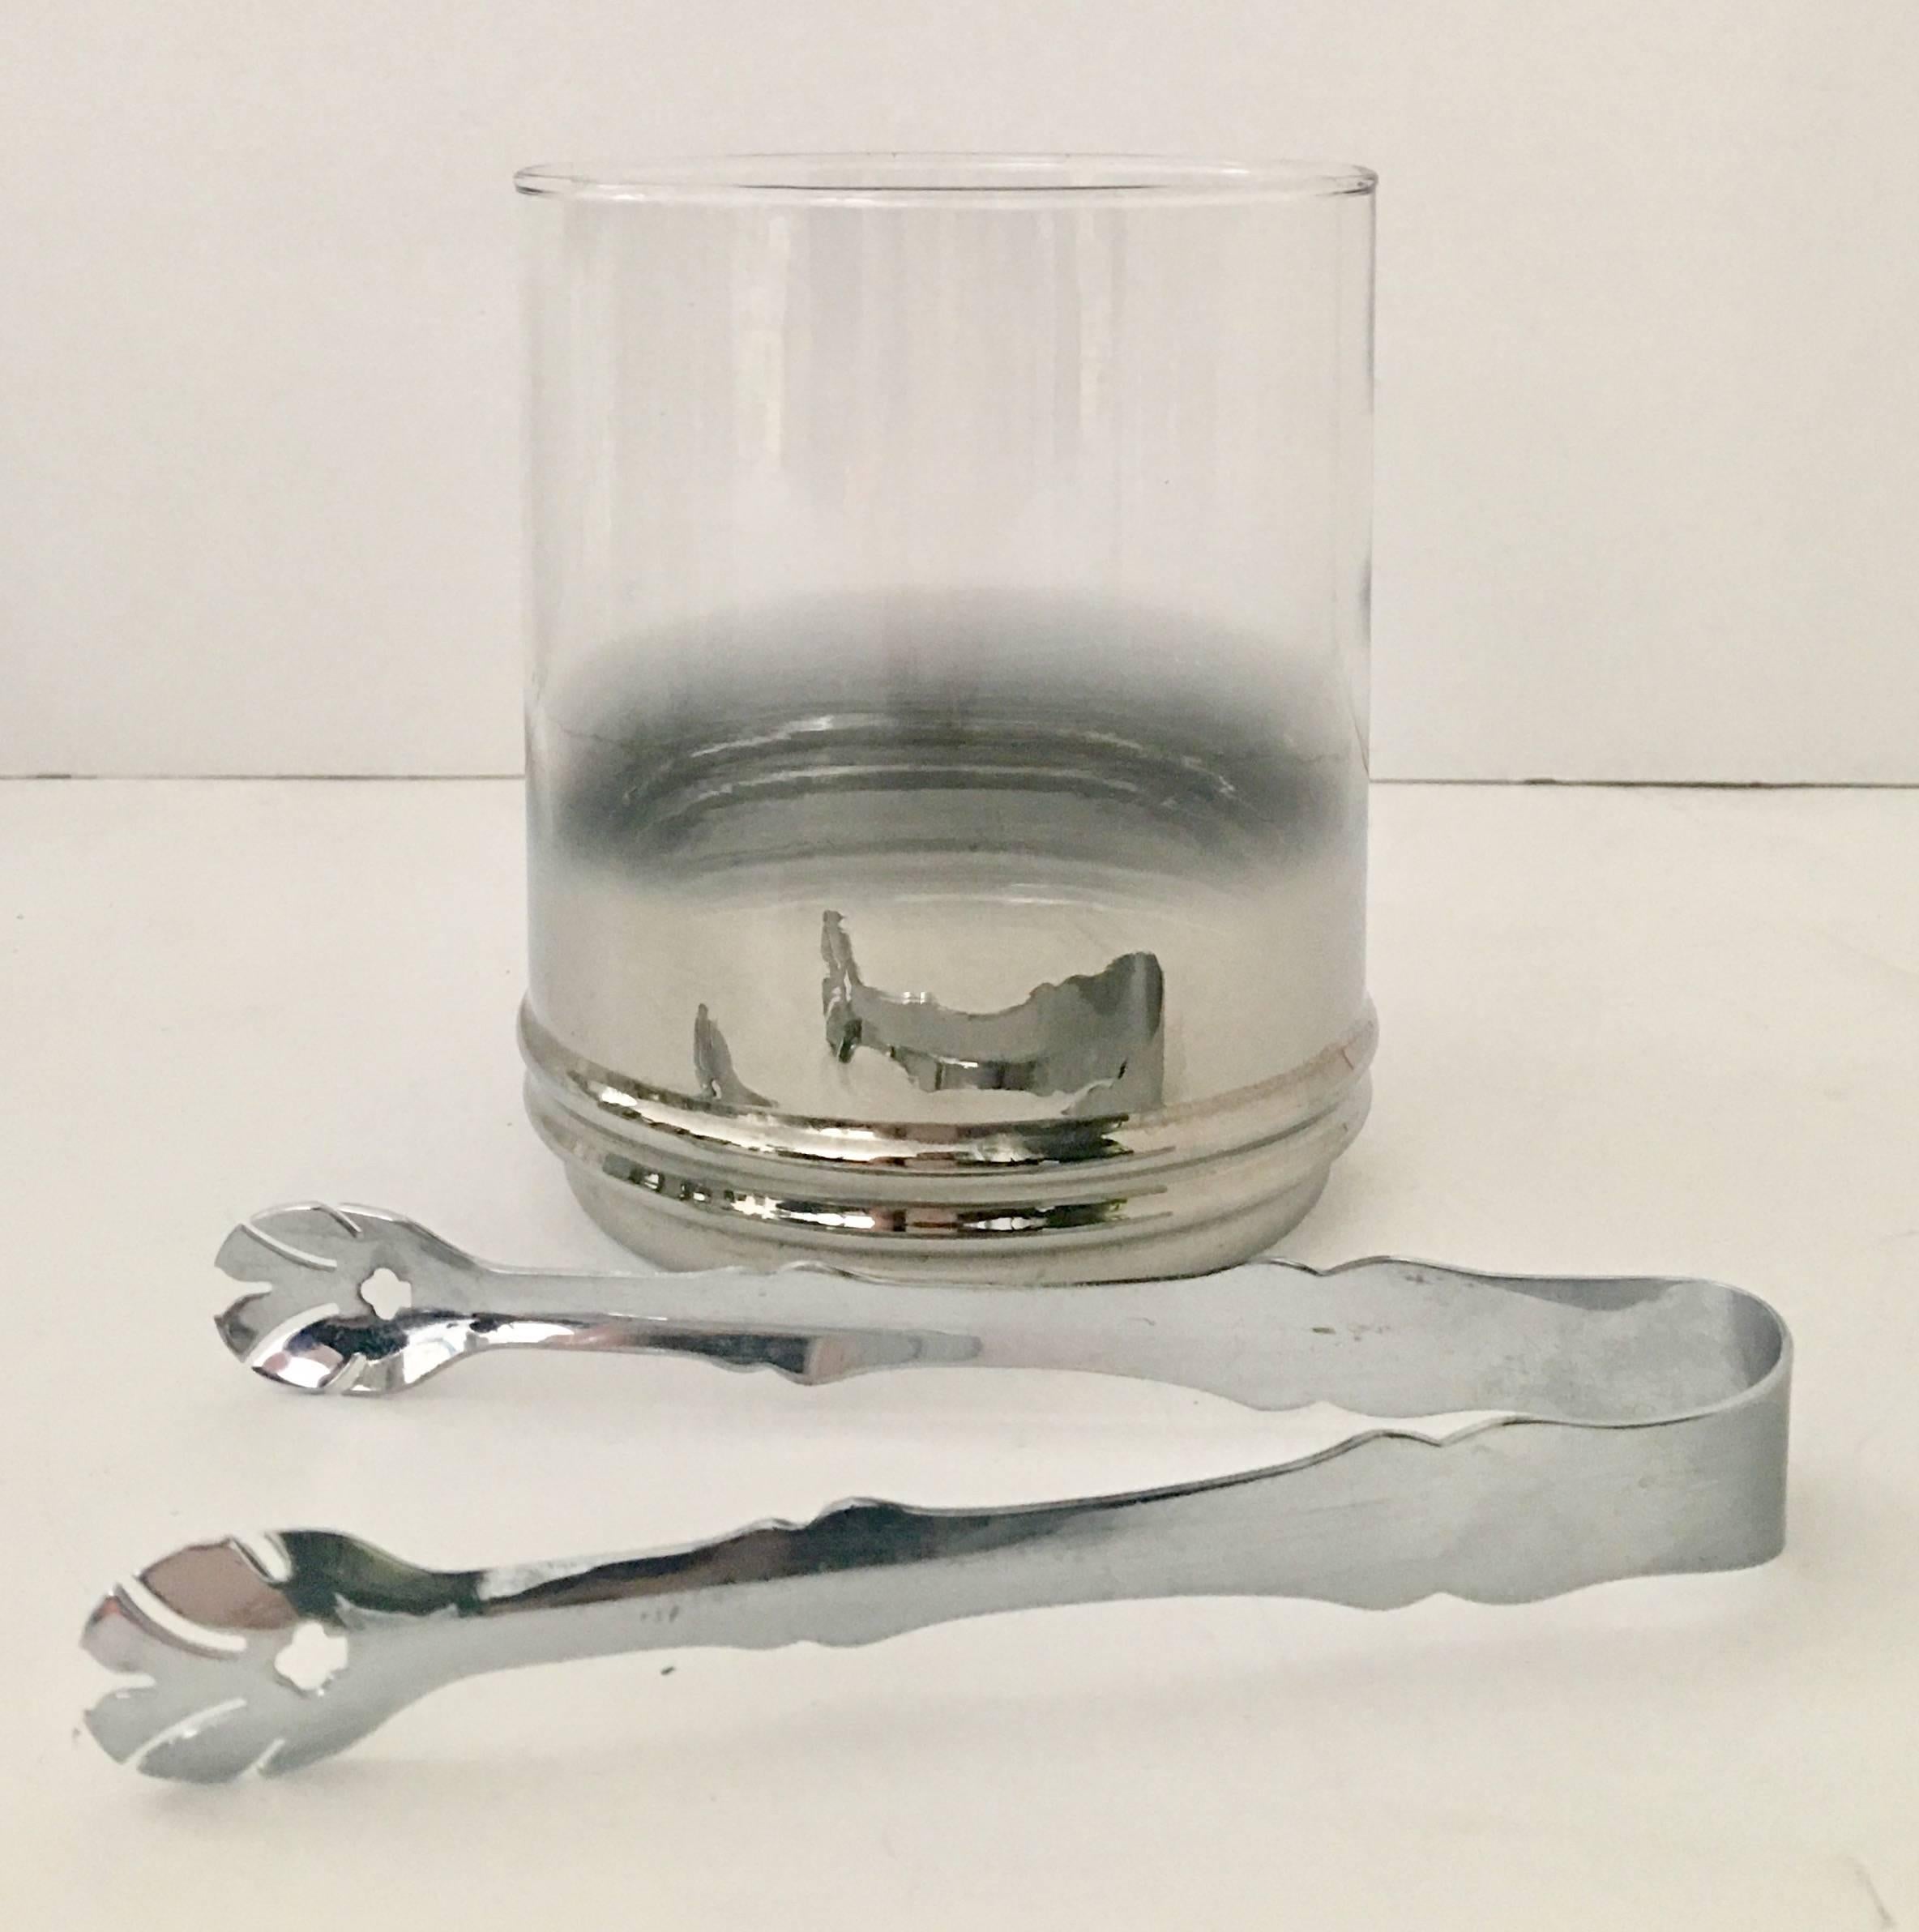 Mid-Century Modern Dorothy Thorpe designed sterling silver overlay "Fade Out" glass drinks set, twenty one pieces.
Set includes,
eight stem goblet glasses, 6" H x 2.75" D.
eight high ball glasses, 5.5" H x 2.75"